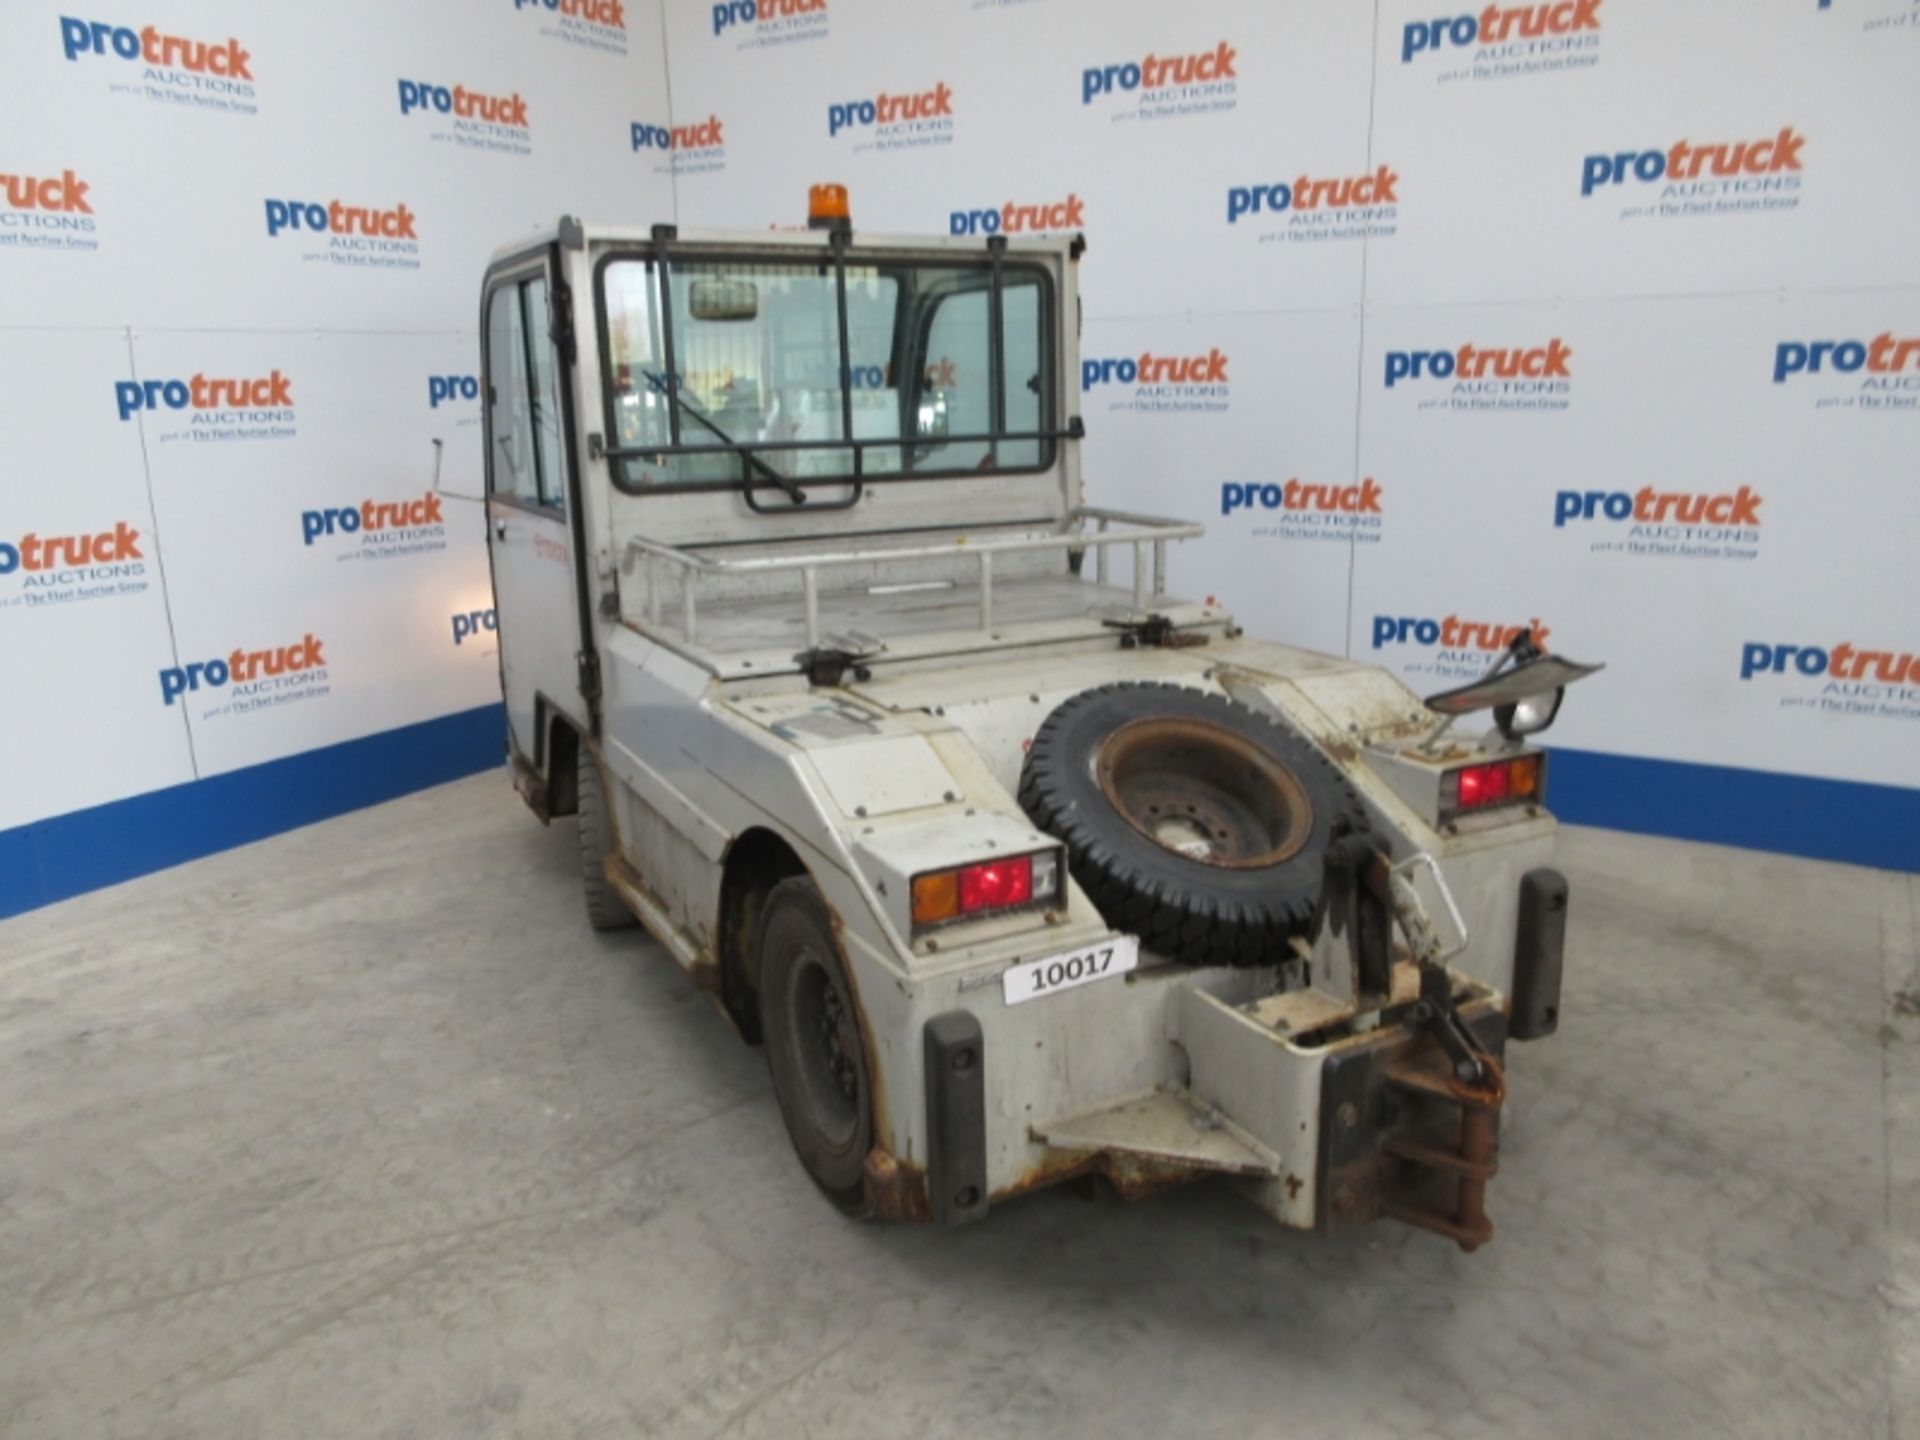 TOYOTA 2TE15 Plant Electric - VIN: 2TE15E10017 - Year: 2007 - 18,841 Hours - Towing Tractor, R.D - Image 4 of 8